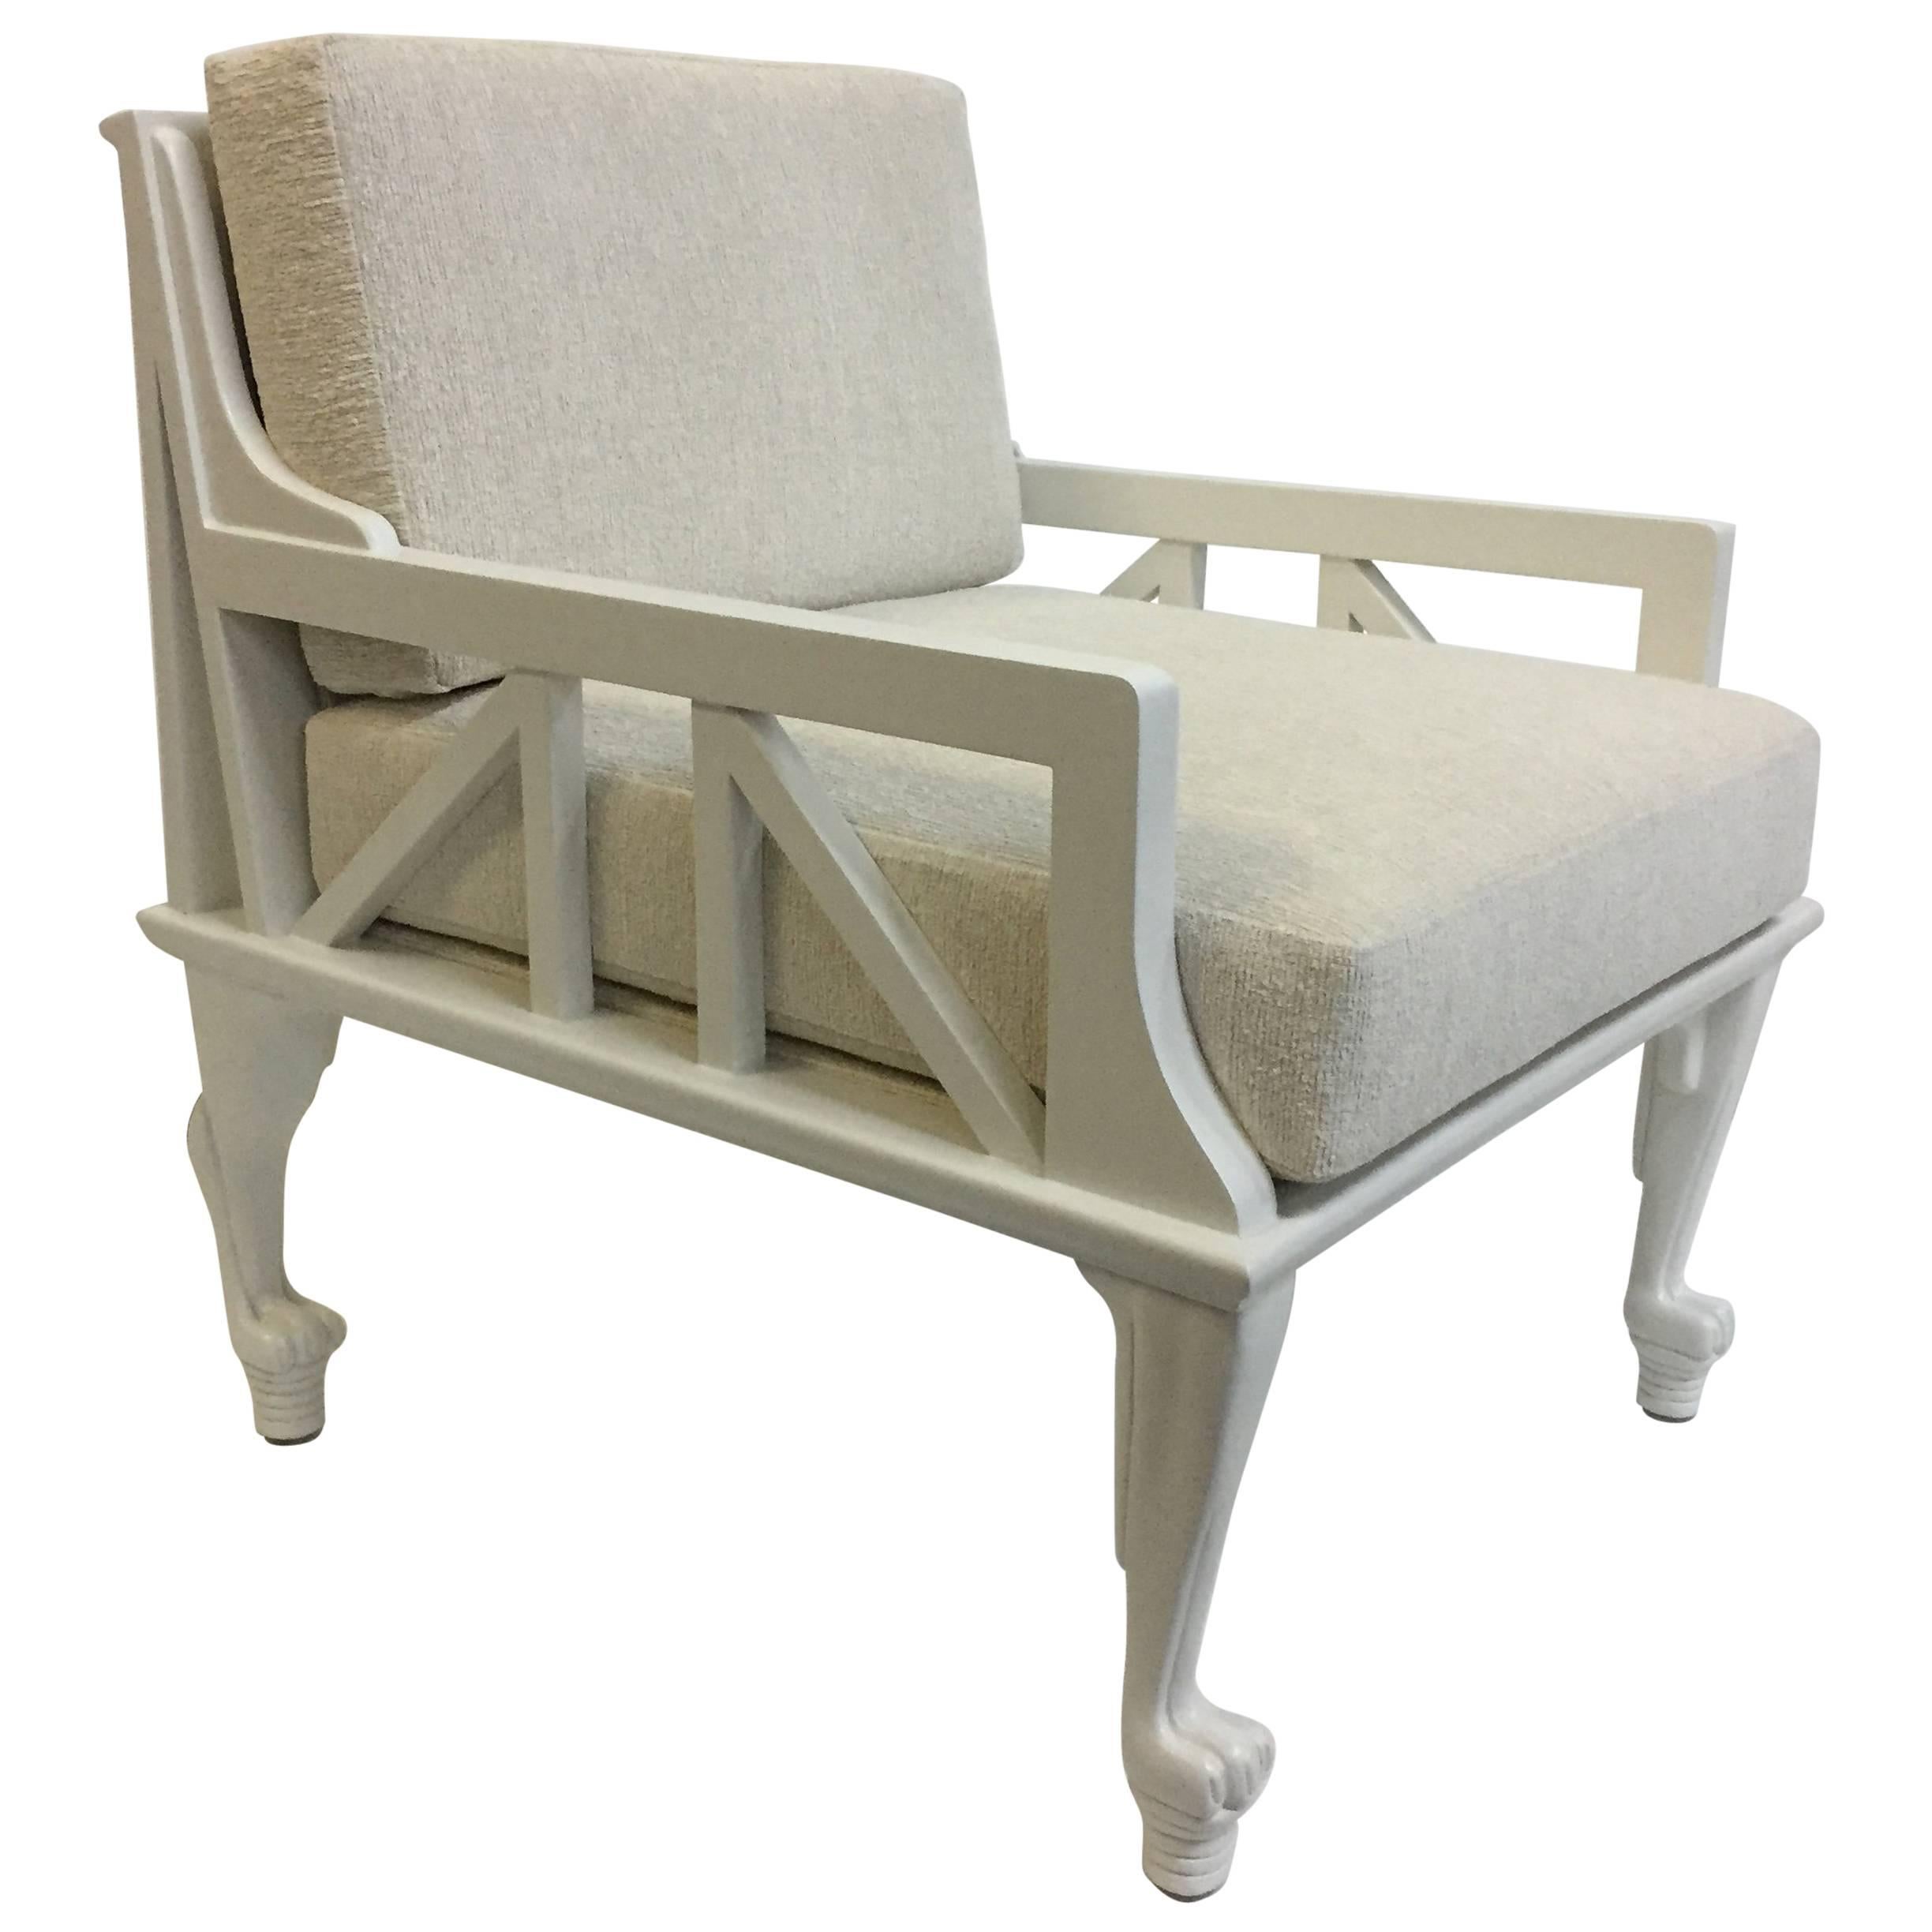 John Hutton "Thebes" Chair Designed for Randolph & Hein For Sale